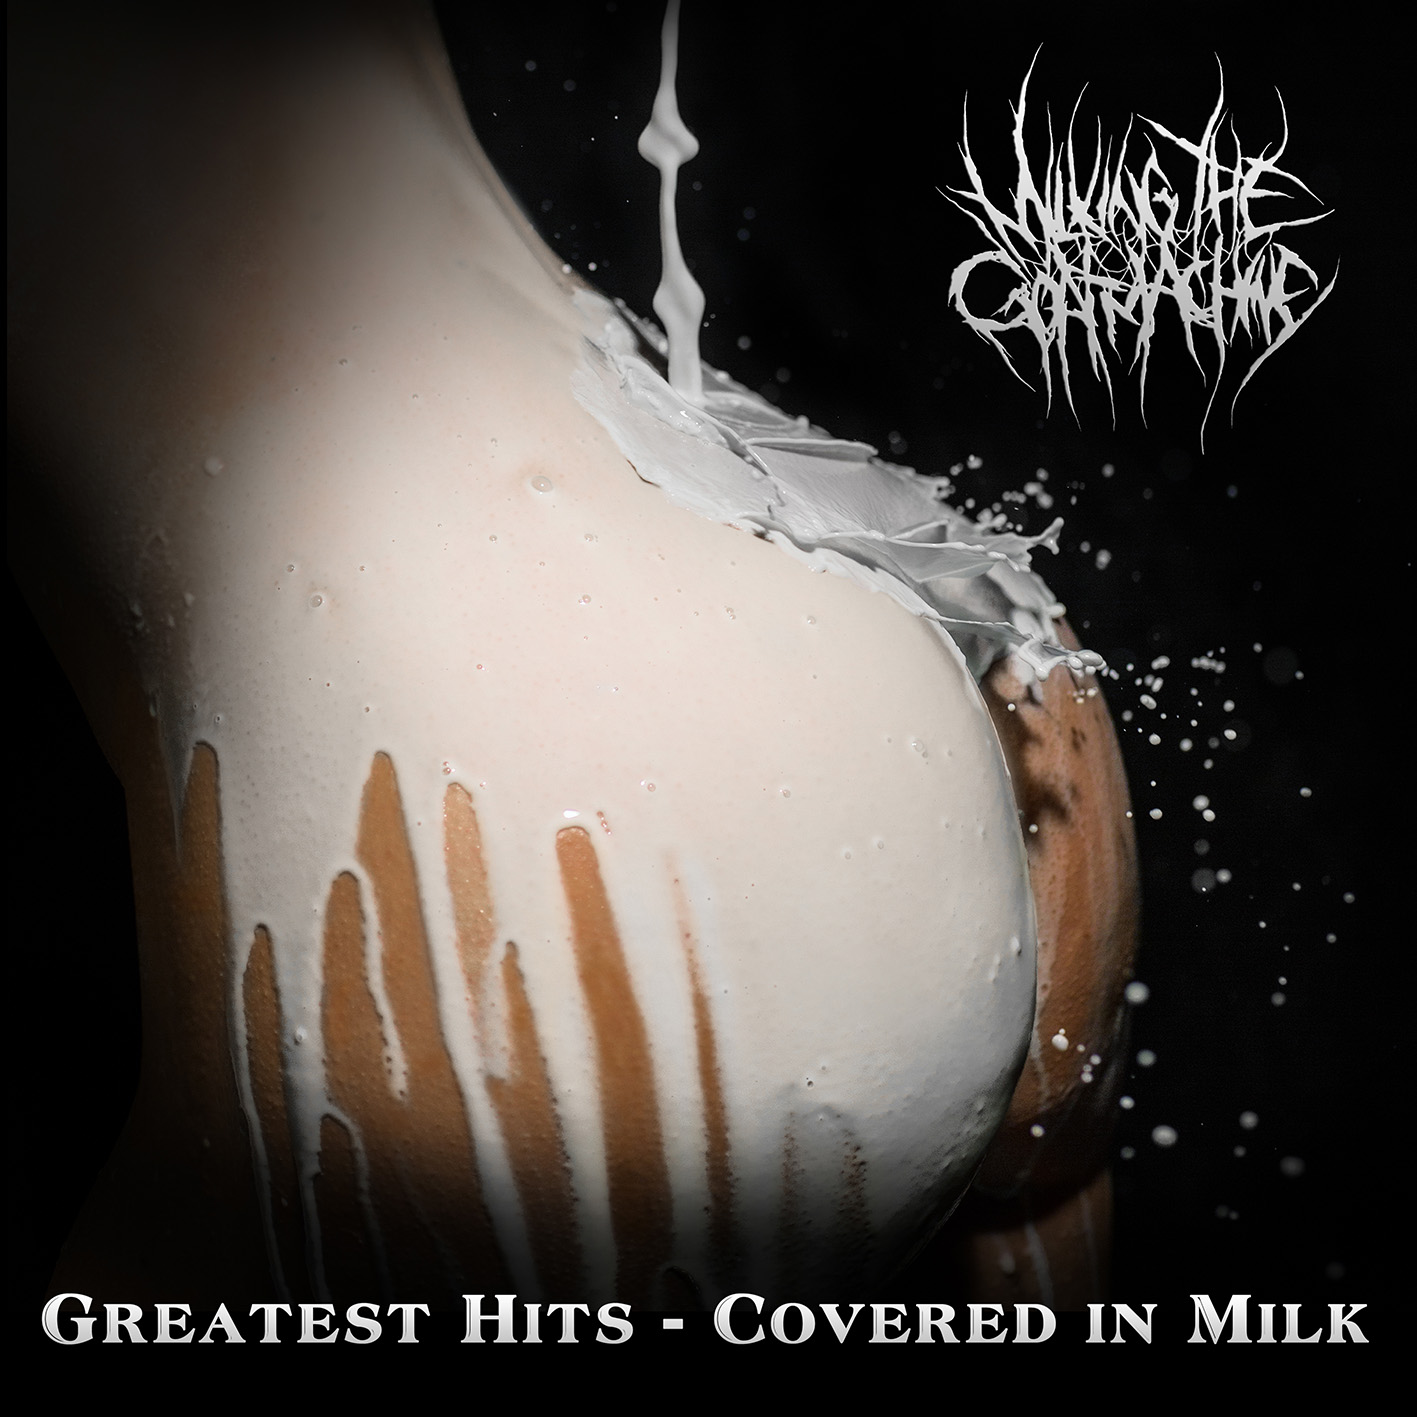 MTG – Greatest Hits – Covered in Milk